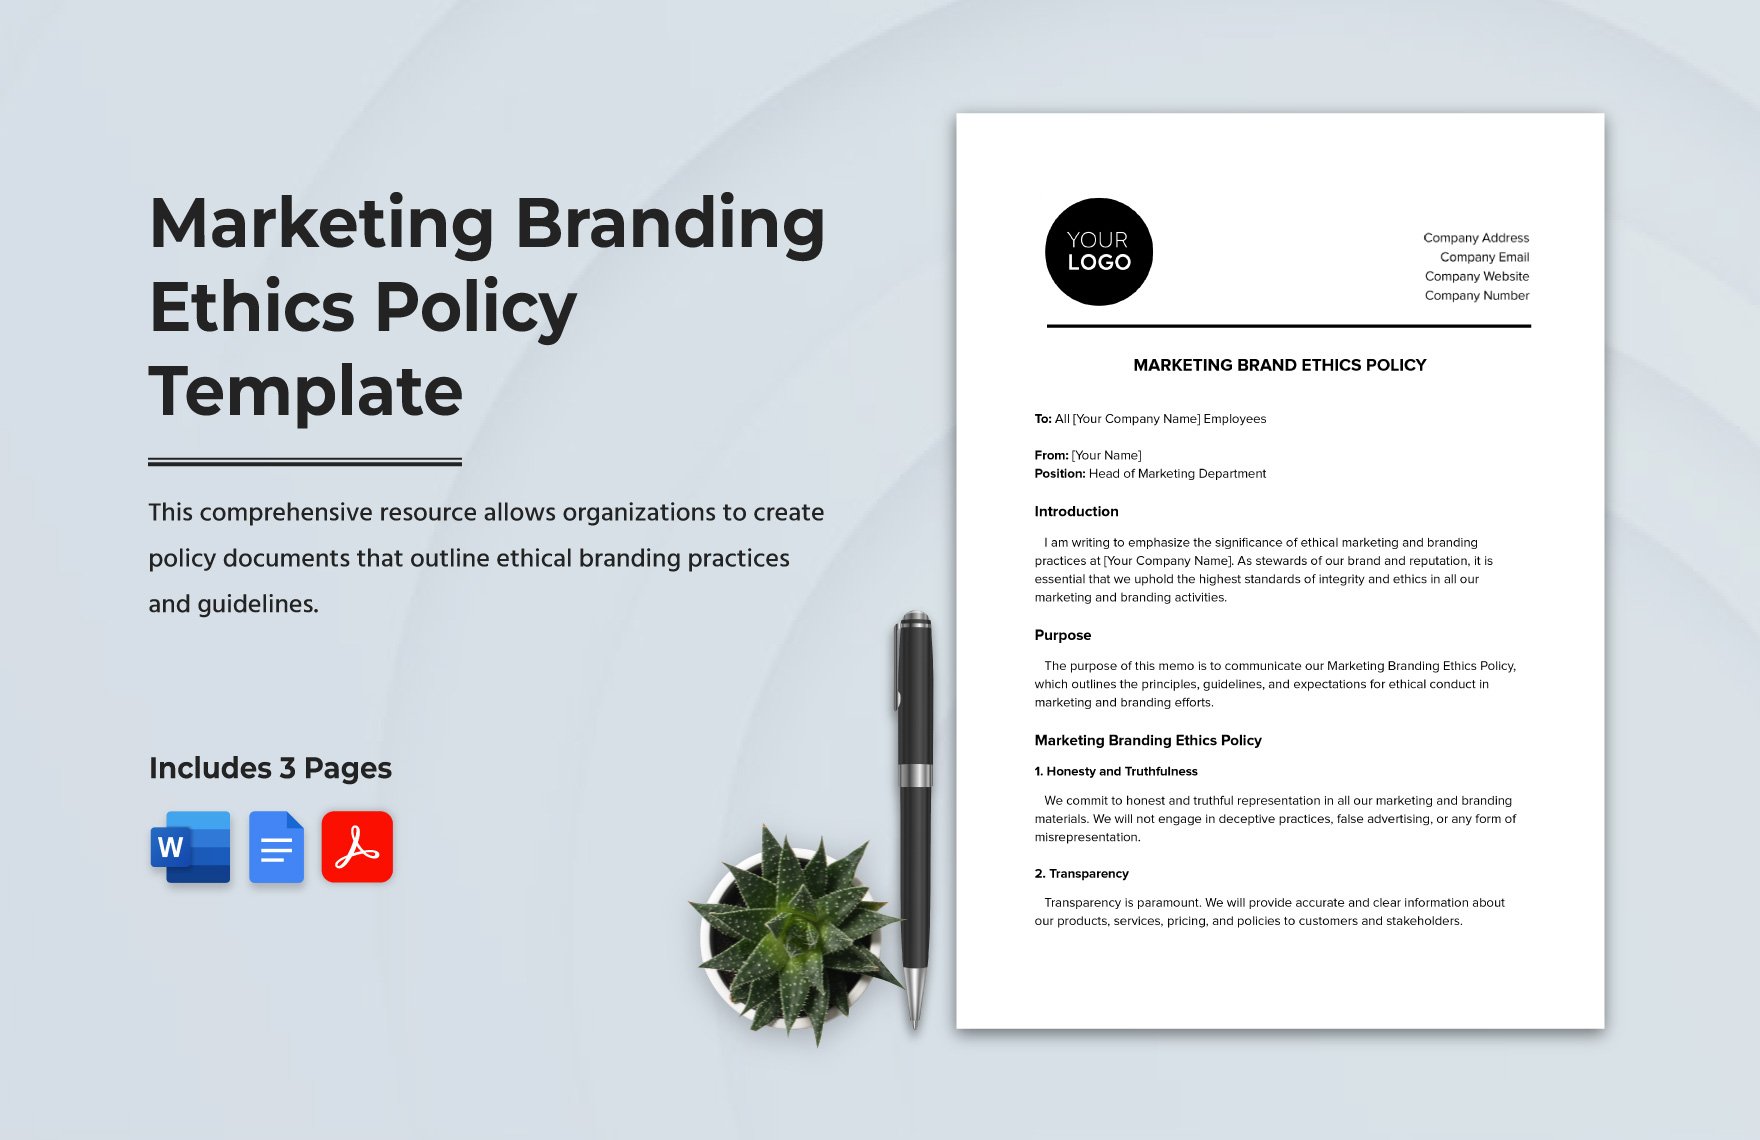 Marketing Branding Ethics Policy Template in Word, Google Docs, PDF